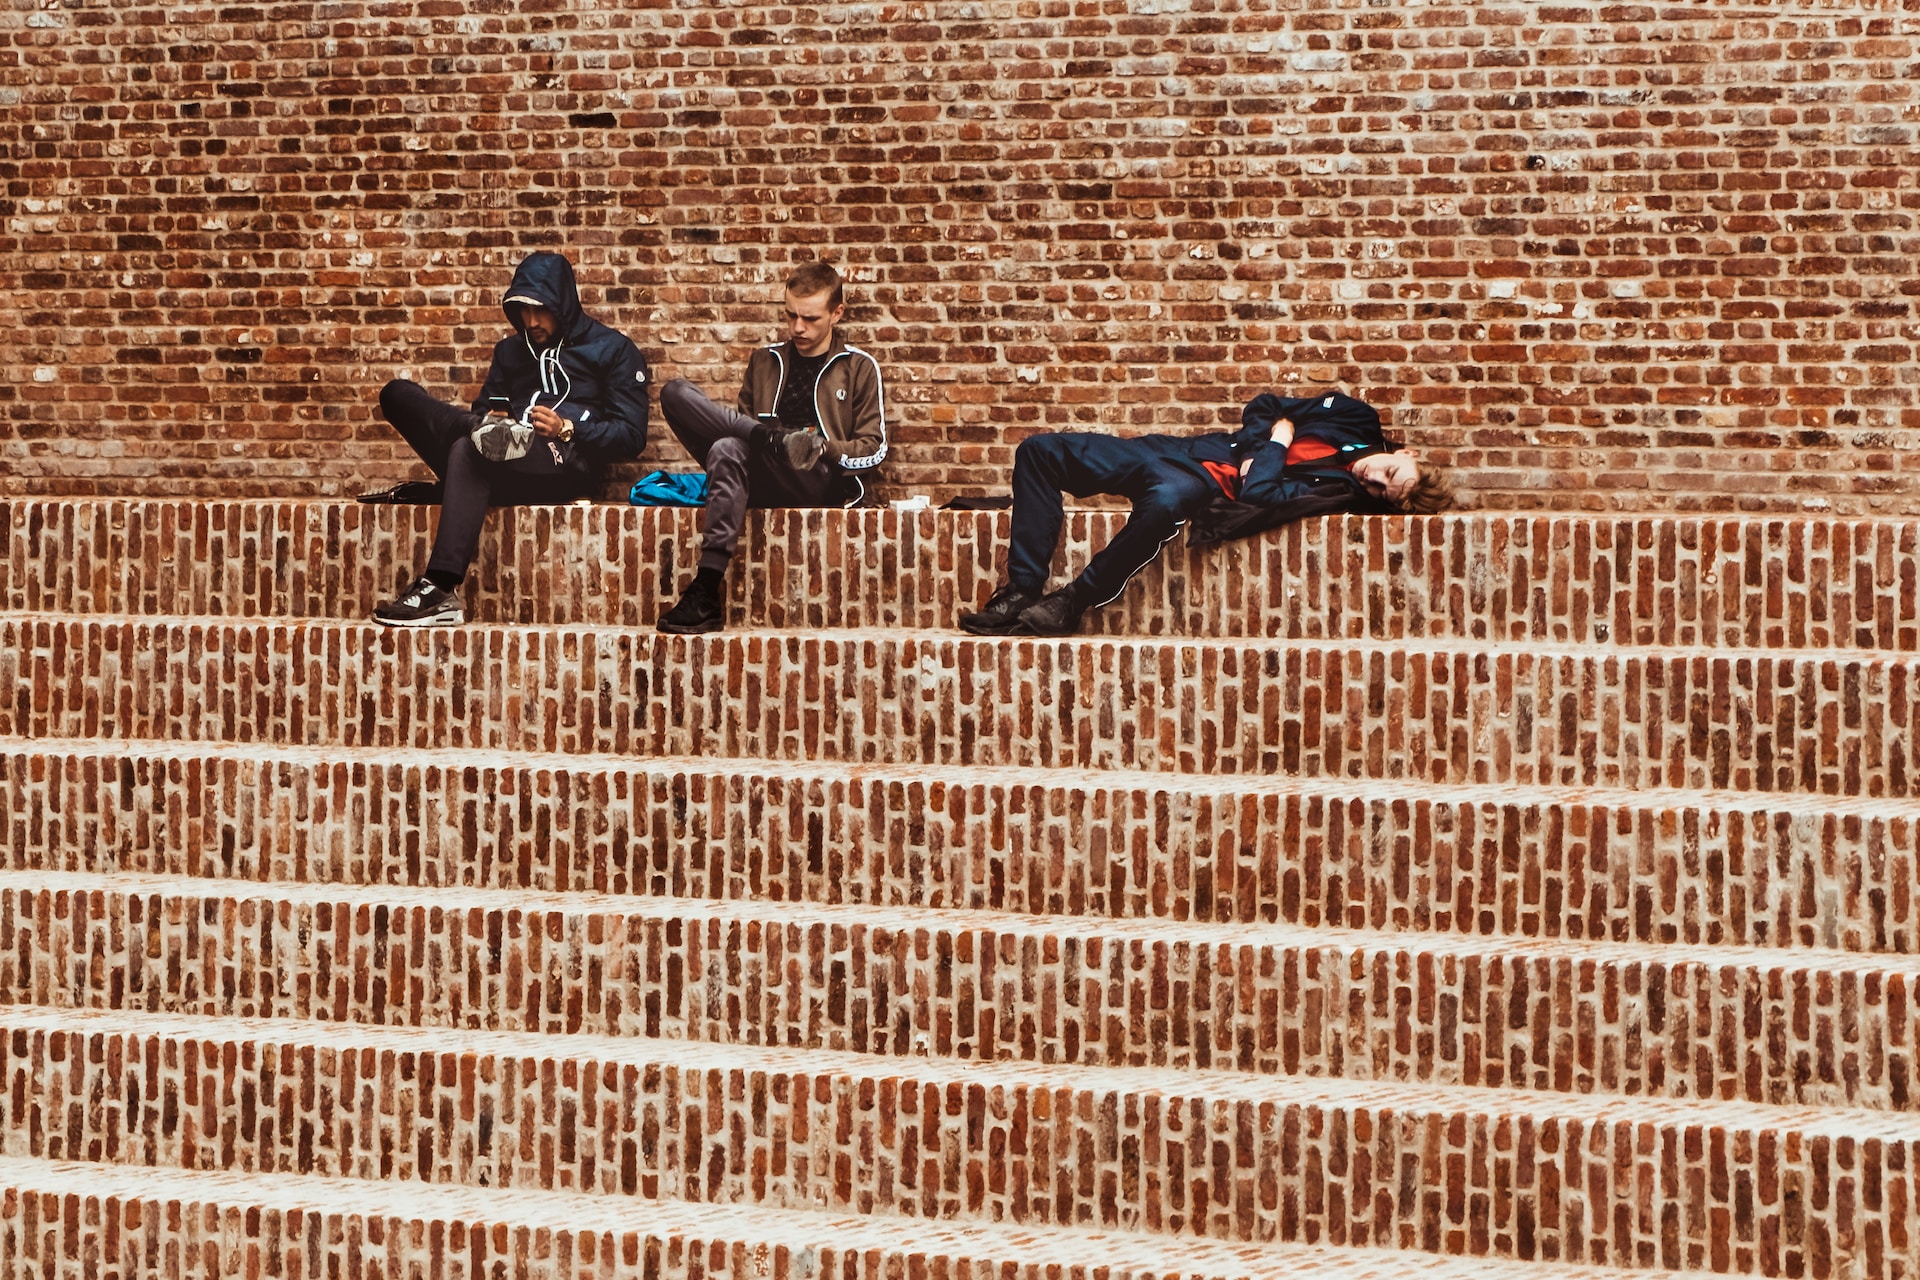 3 men, relaxing and lying down on brick steps